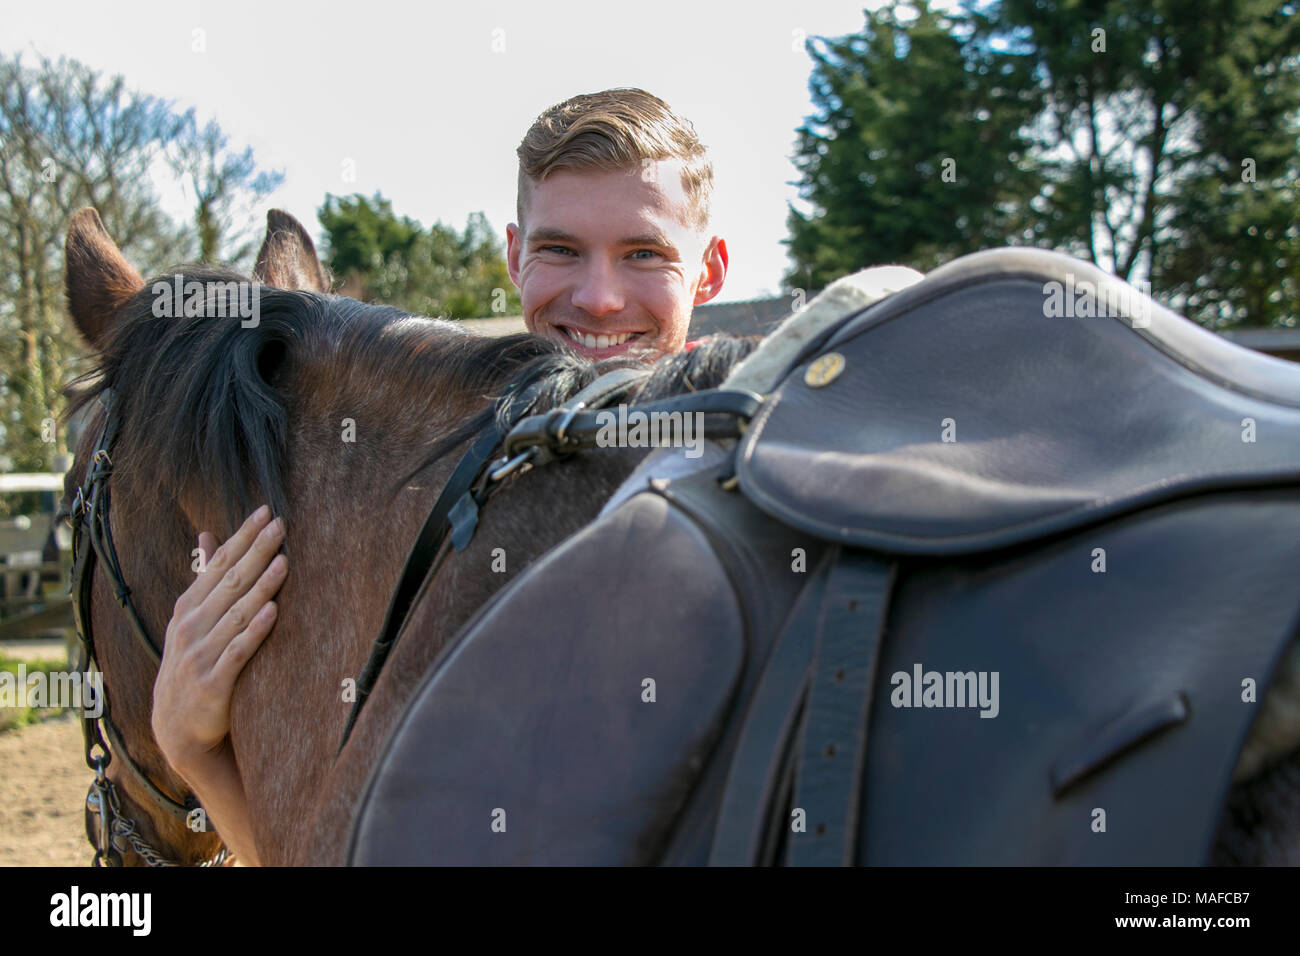 Handsome, smiling horse rider standing next to and petting his horse. Stock Photo